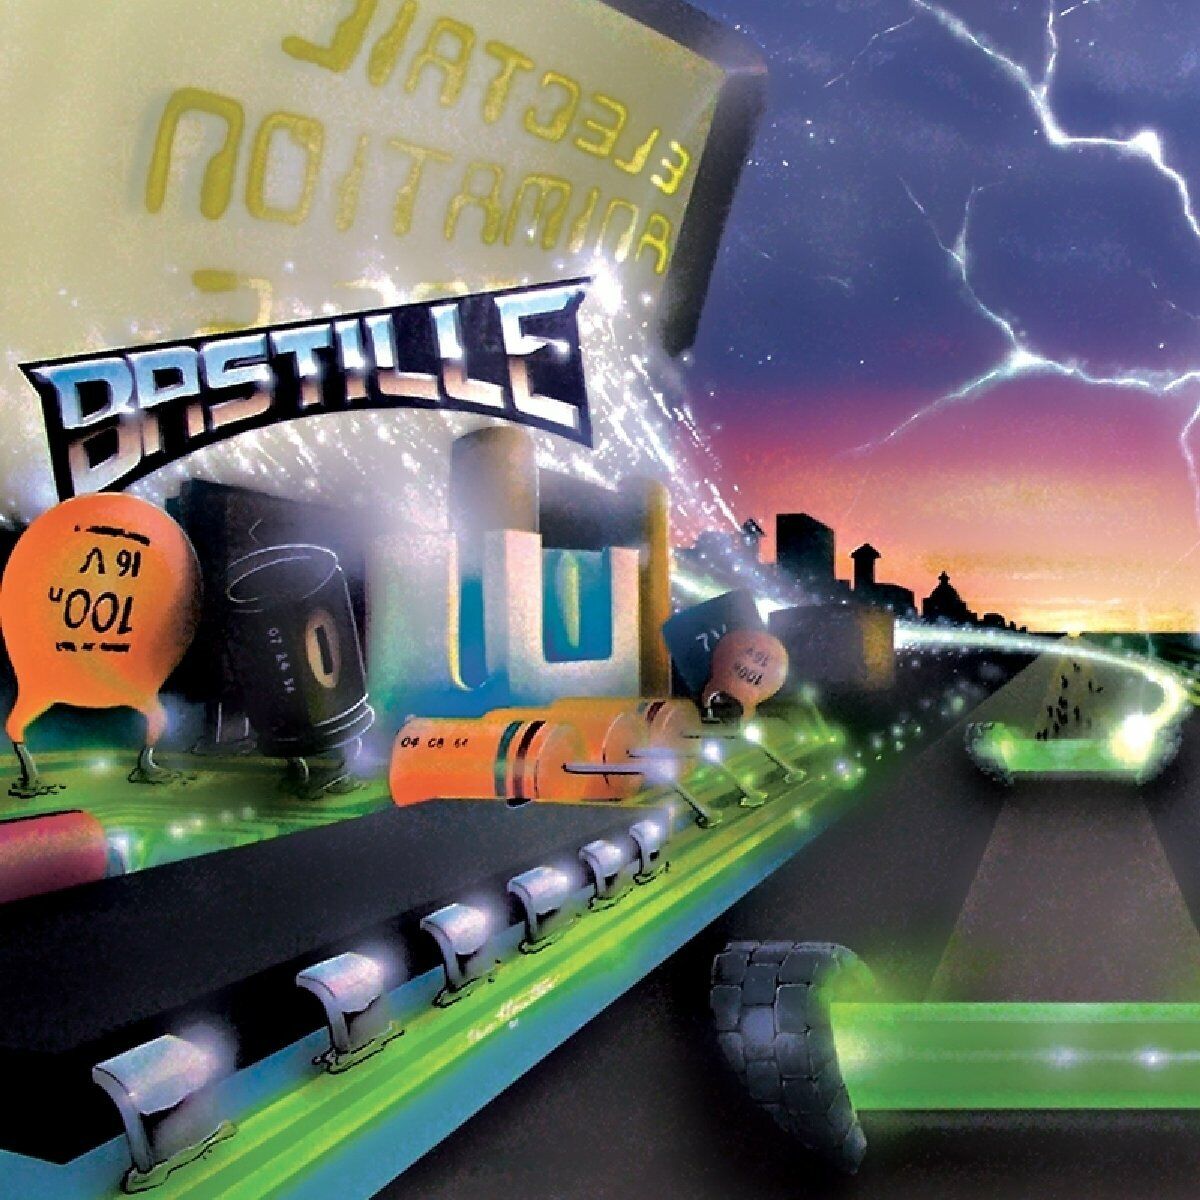 Bastille - Electric Animation CD 2013 Remastered Heavy Metal No Remorse Records